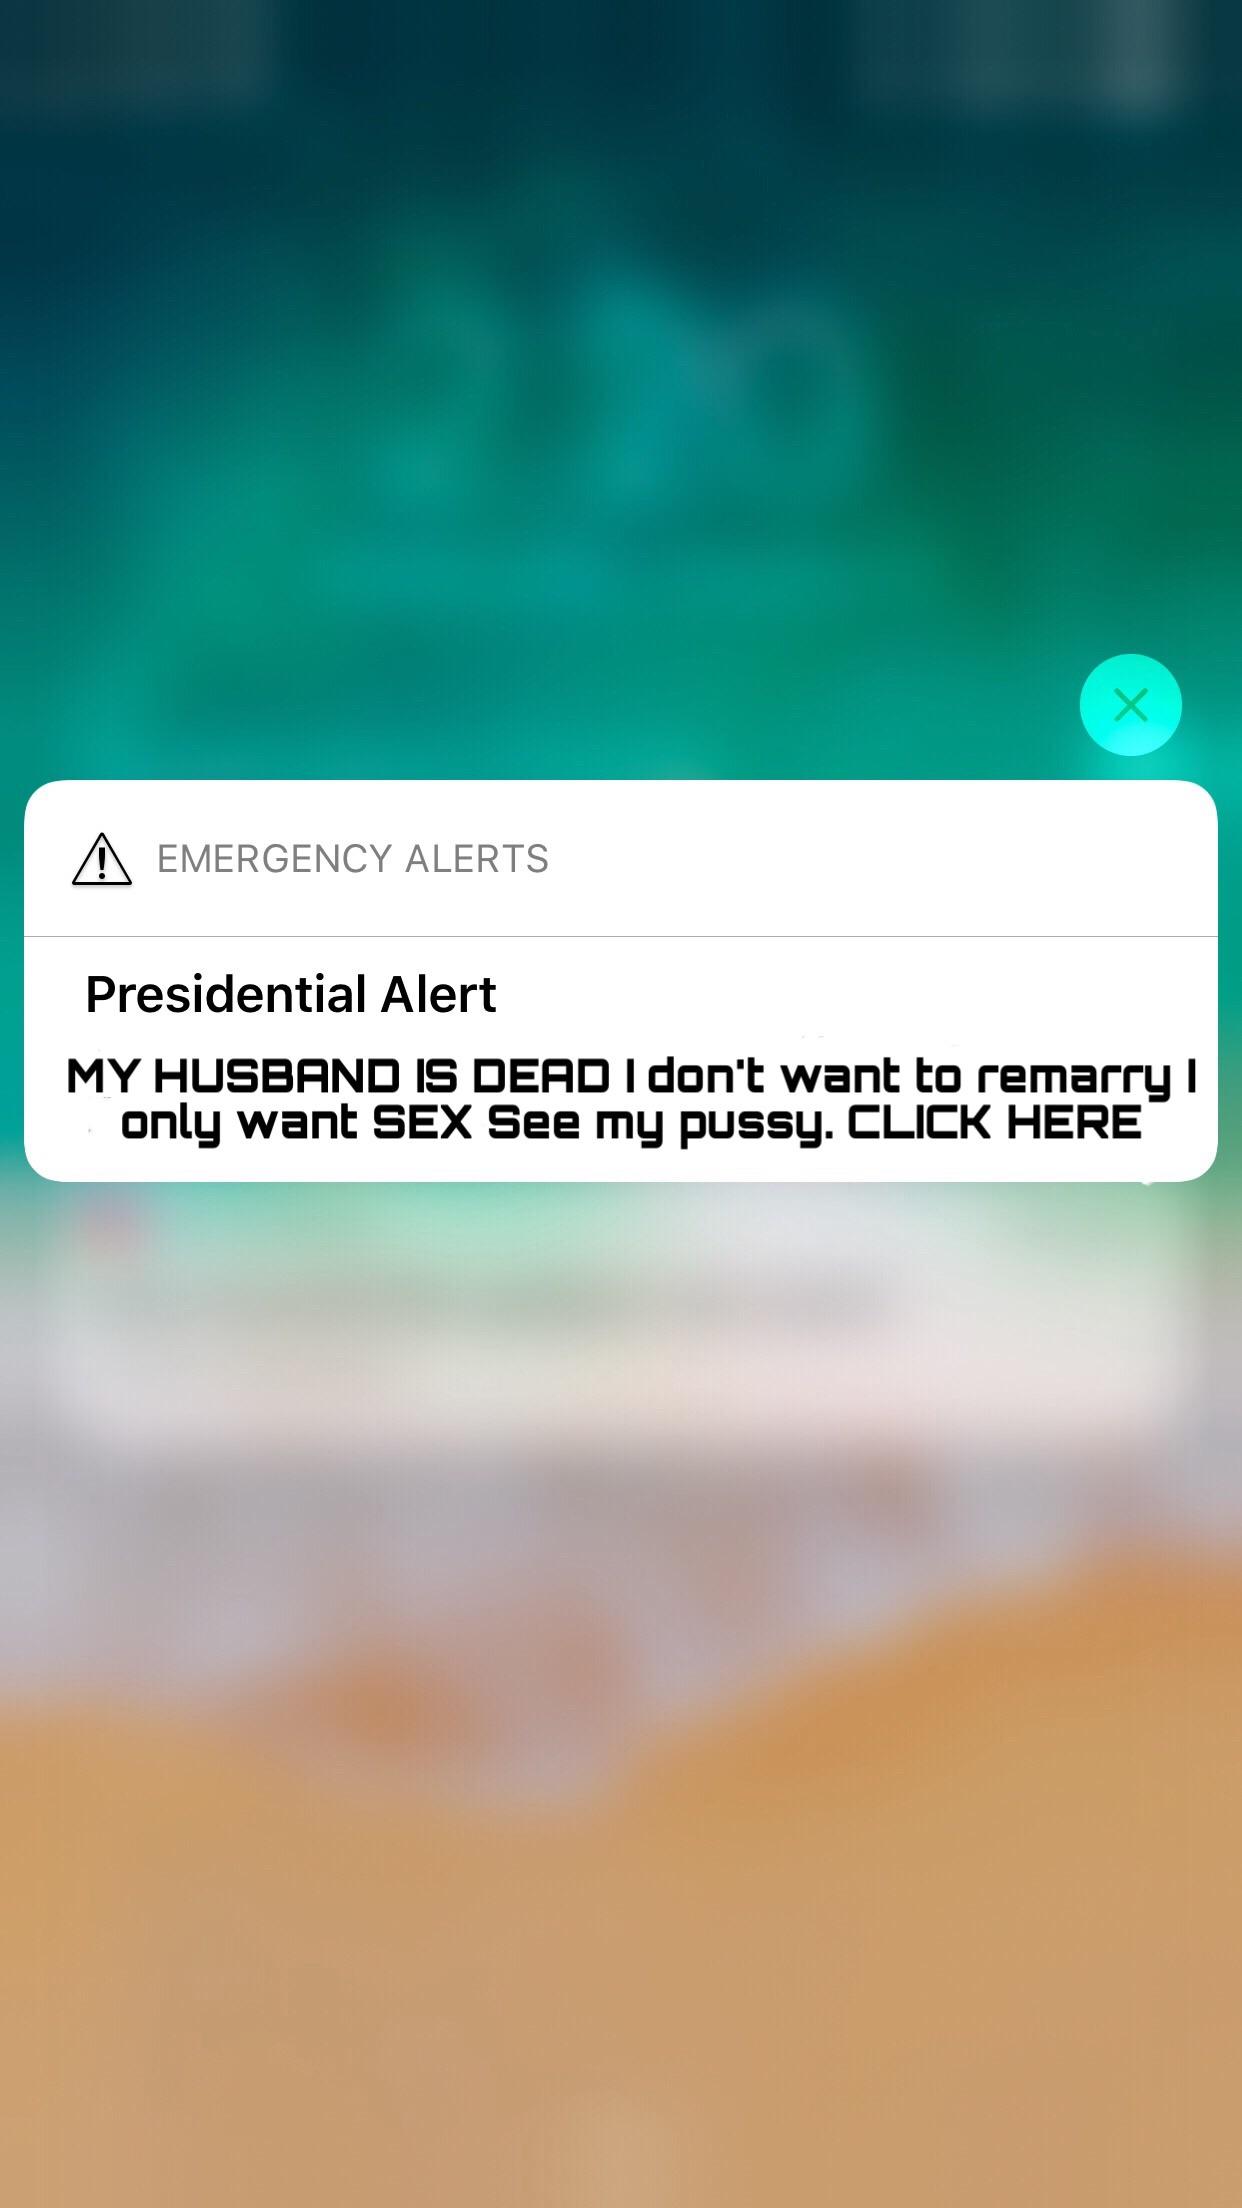 Trump meme of sky - A Emergency Alerts Presidential Alert My Husband Is Dead I don't want to remarry | only want Sex See my pussy. Click Here